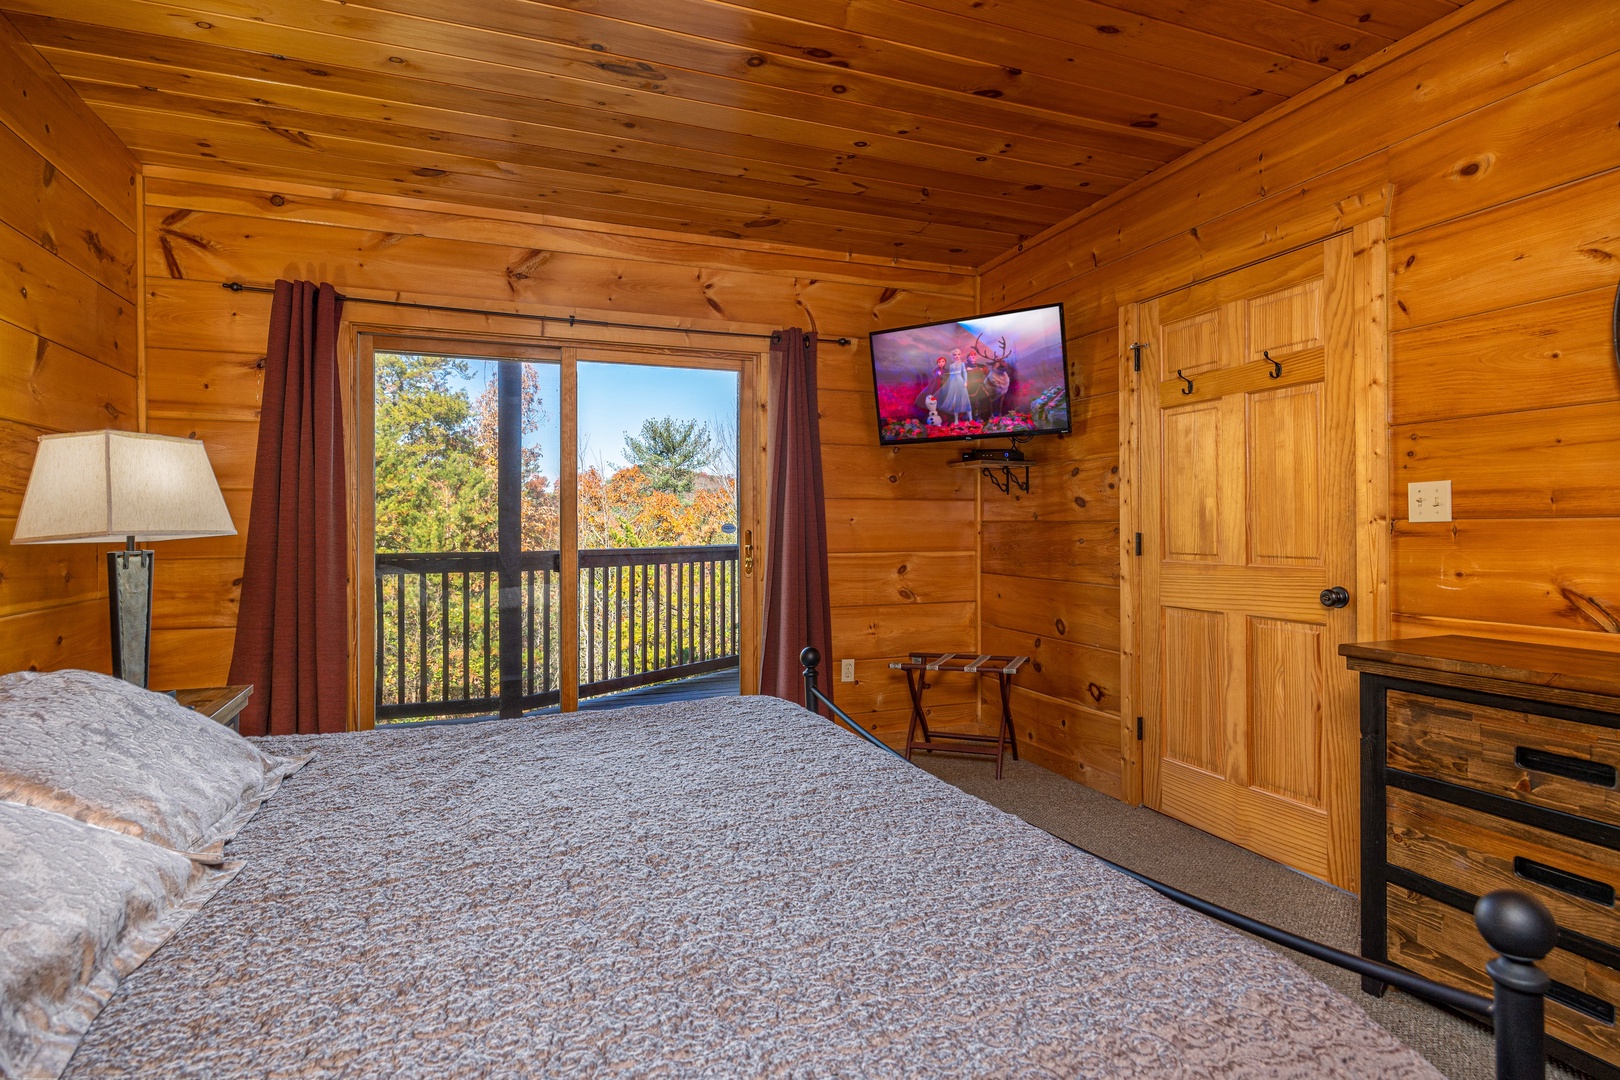 Forth bedroom amenities at Mountain Laurel Lodge, a 4 bedroom cabin rental located in Pigeon Forge